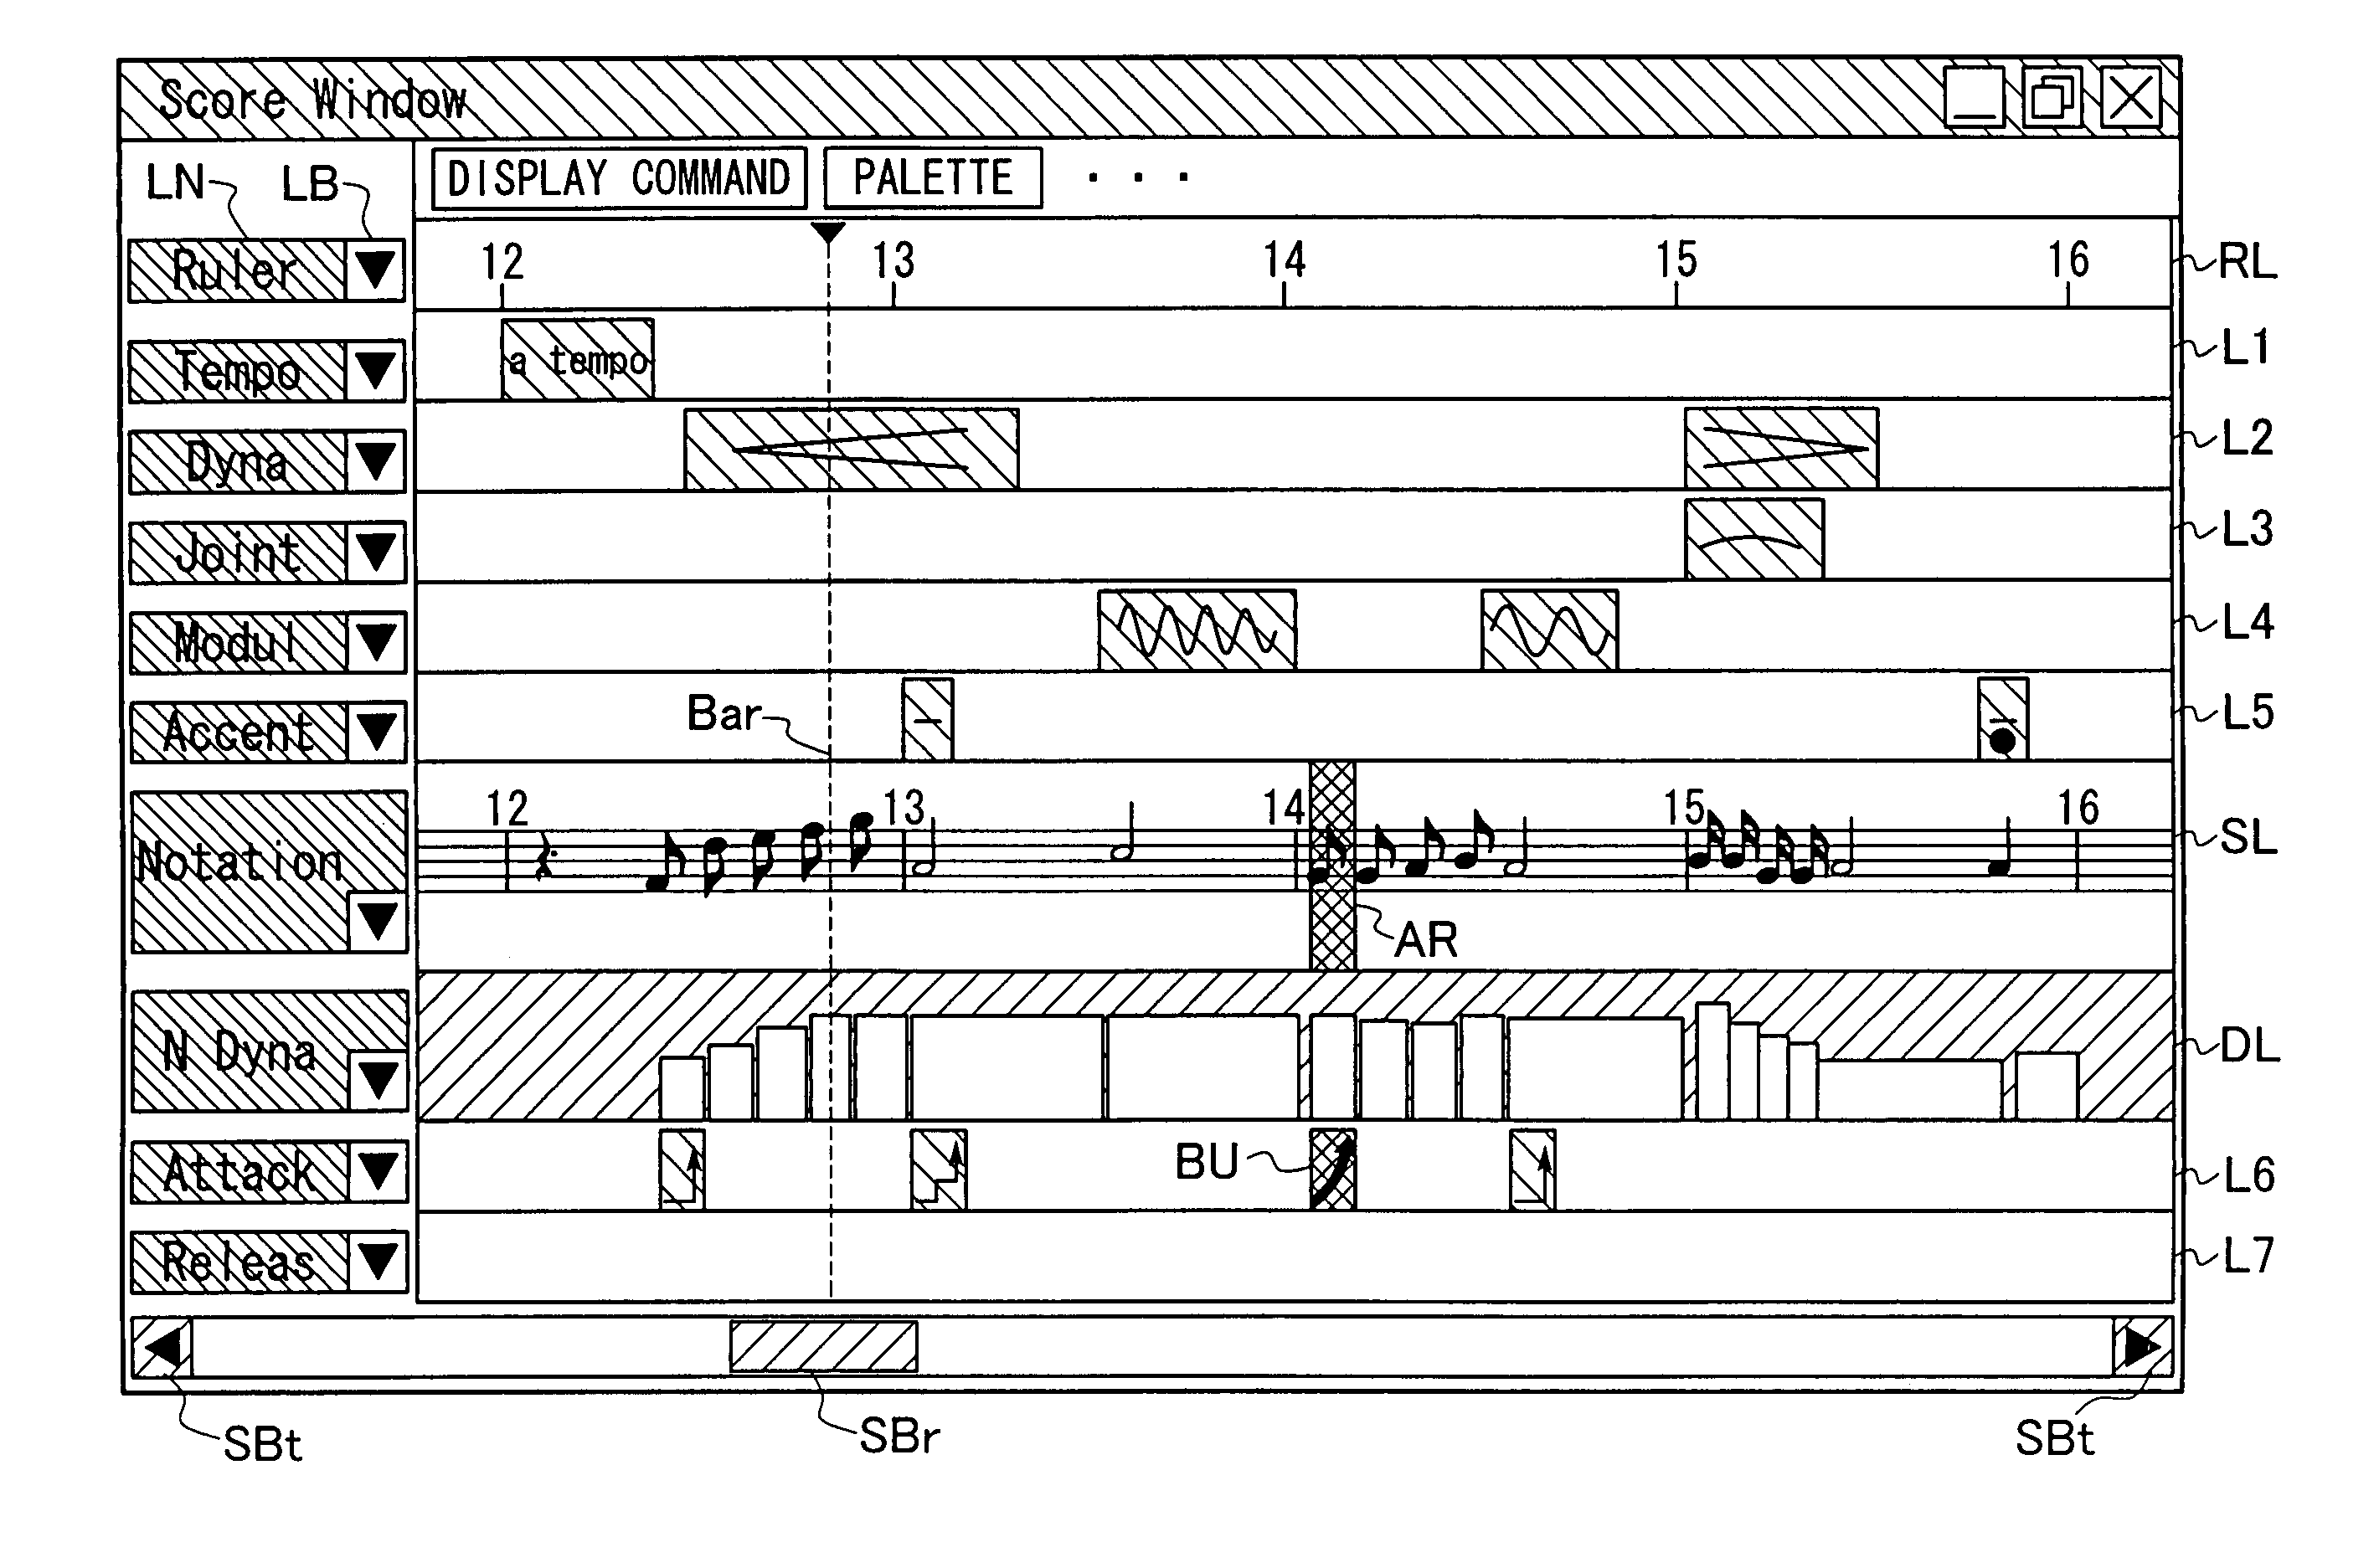 Method and apparatus for editing performance data with modifications of icons of musical symbols